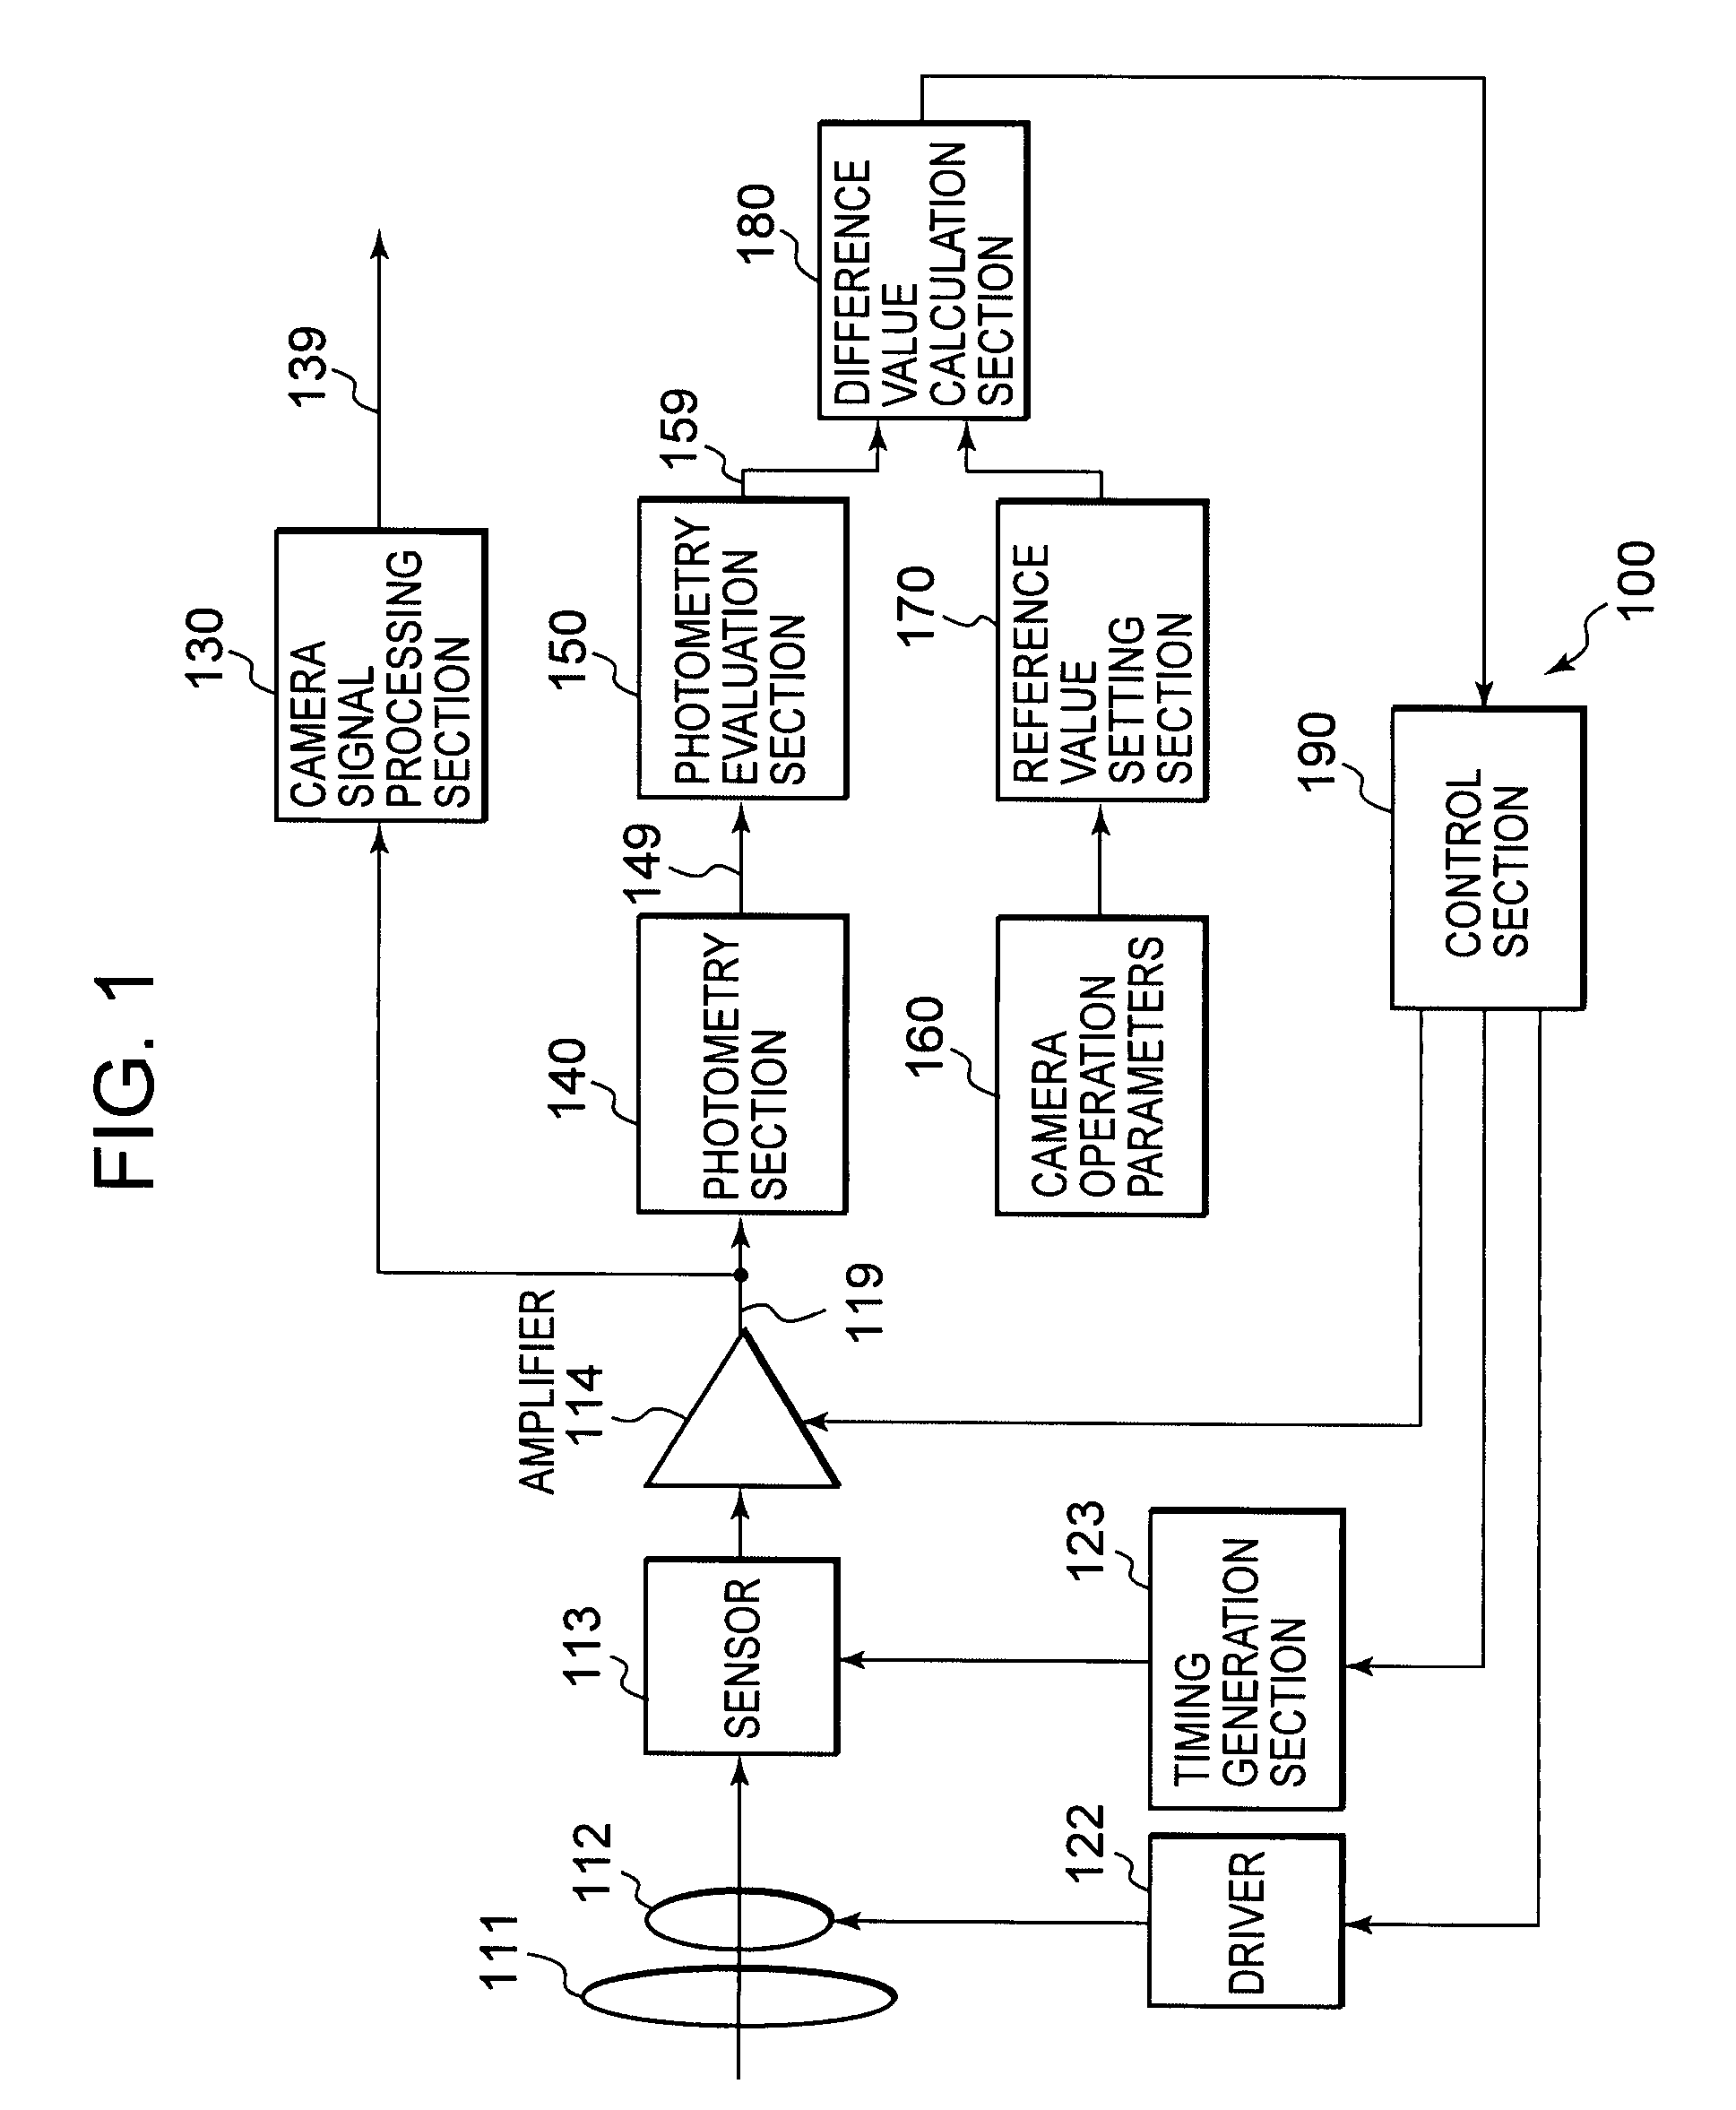 Image processing apparatus, image capture apparatus, image output apparatus, and method and program for these apparatus